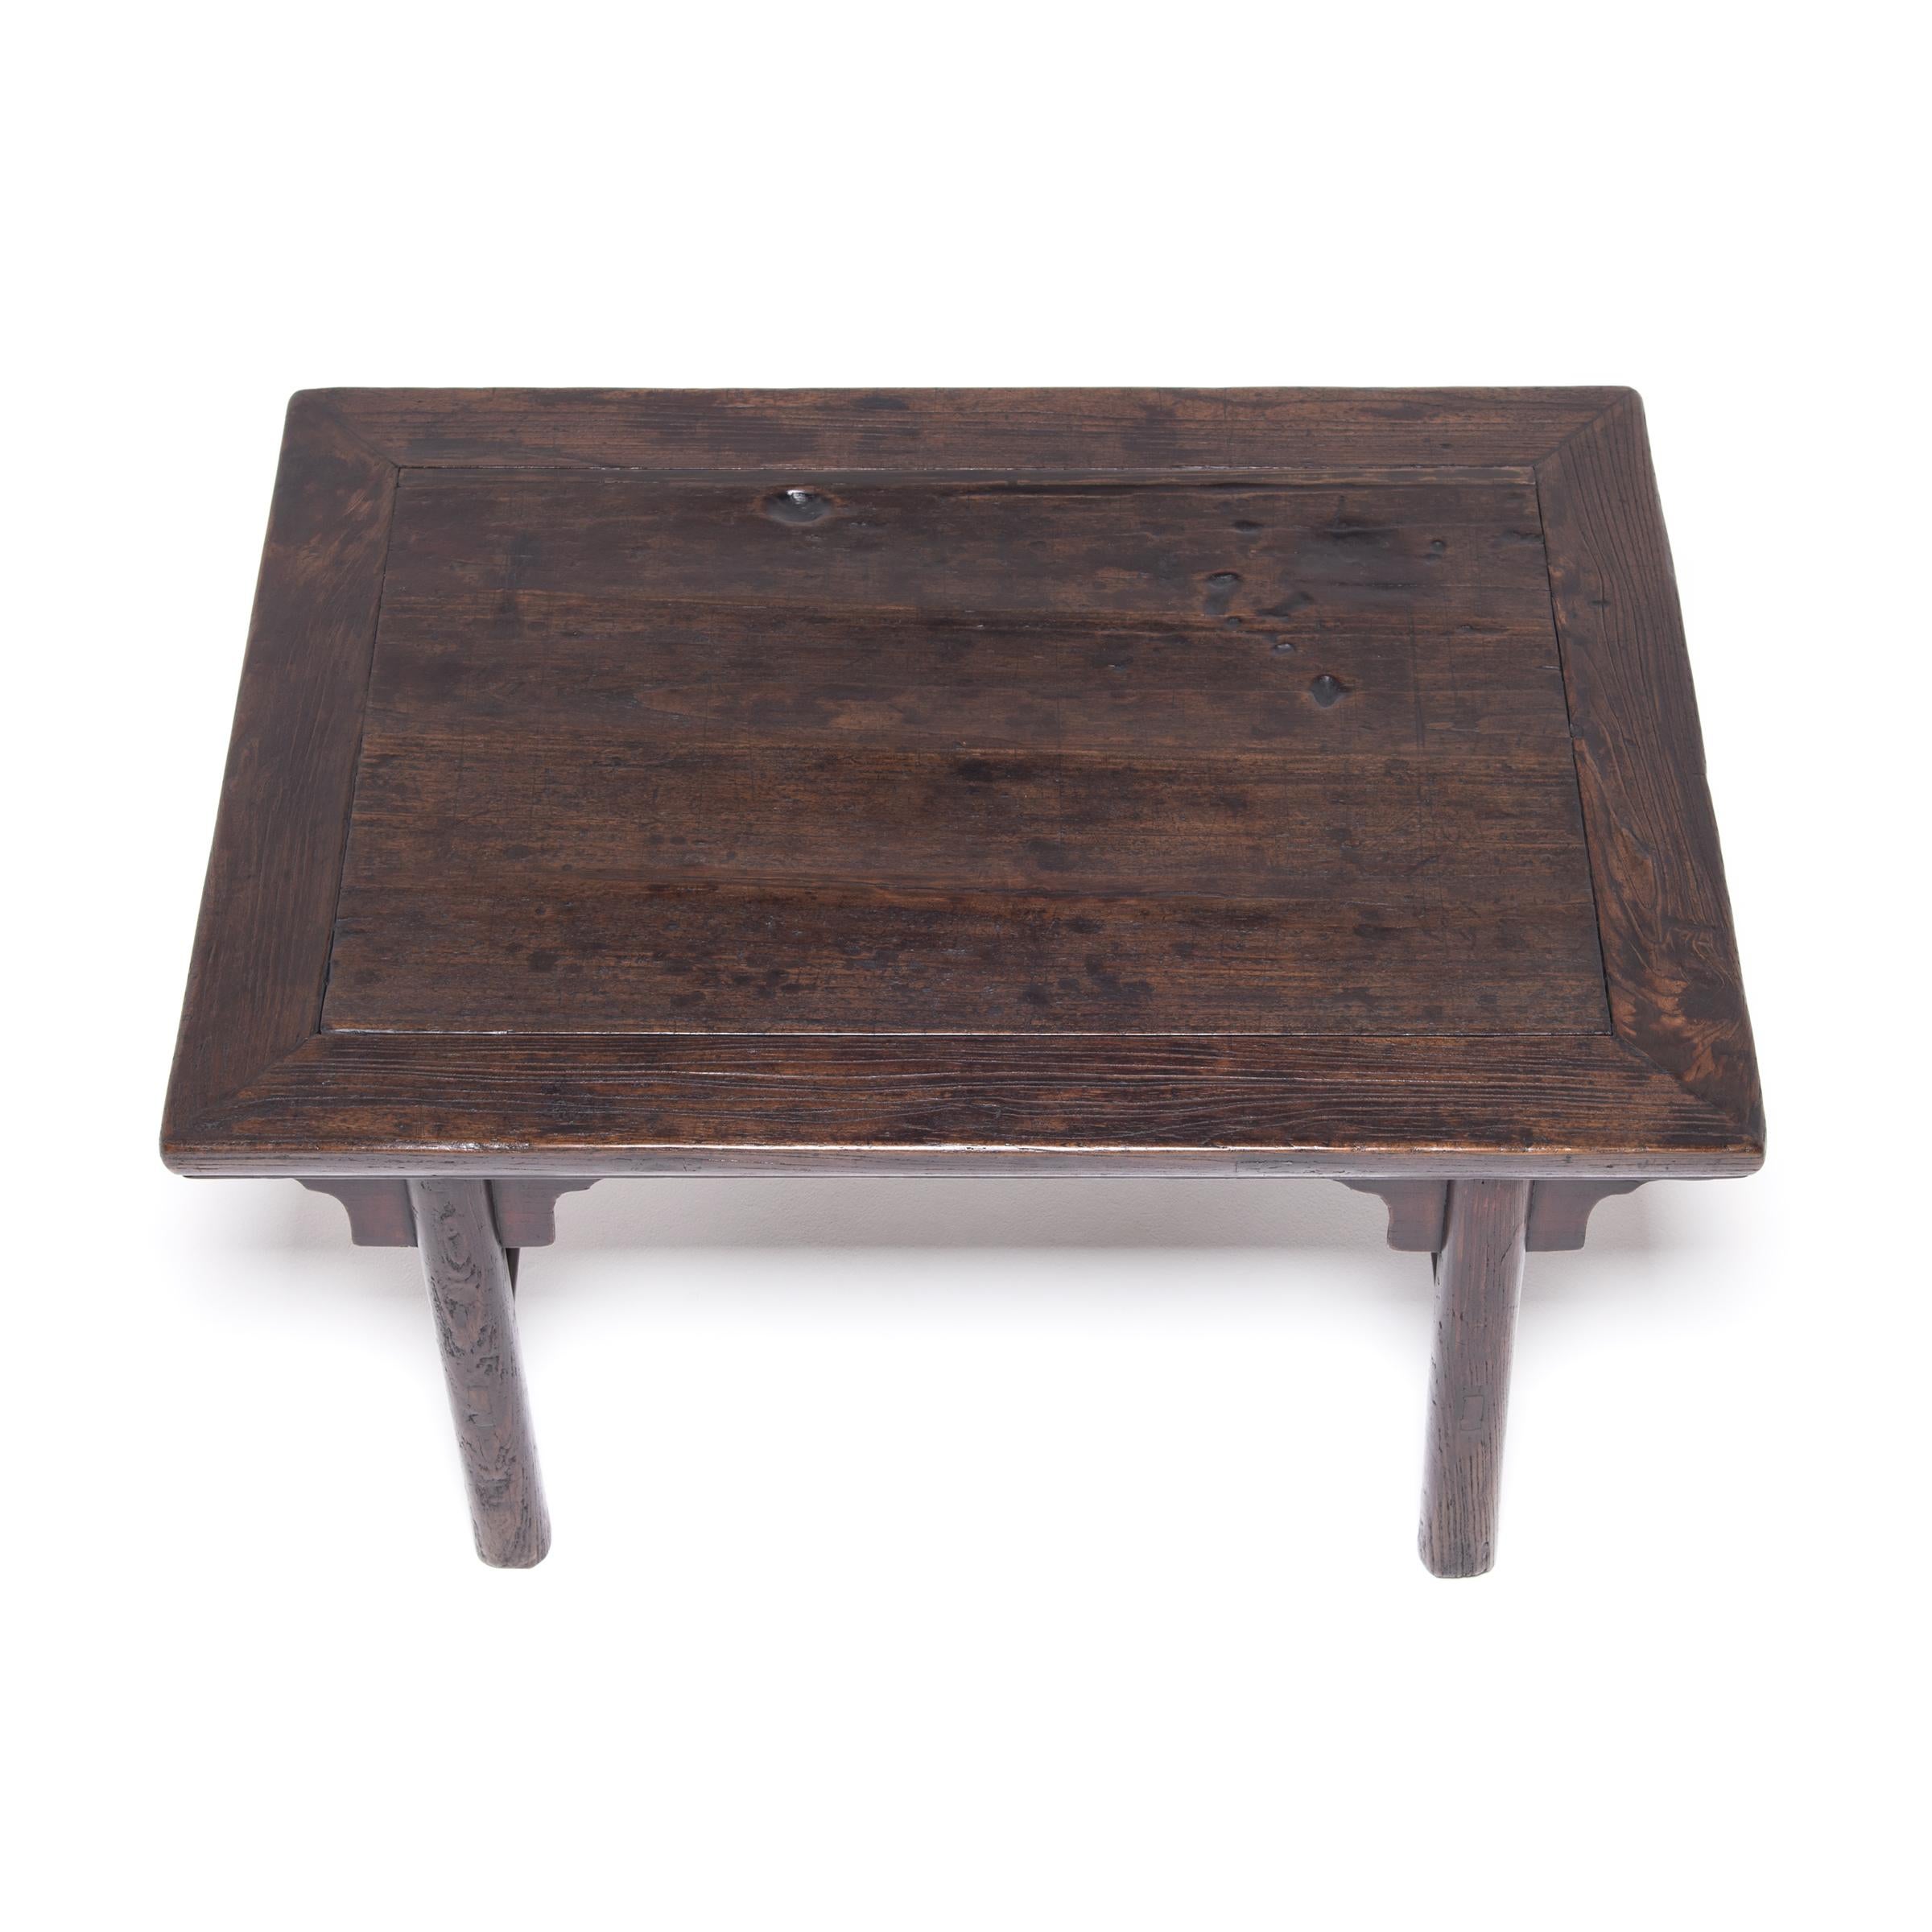 Pair of Chinese Low Inset Leg Tables, c. 1850 For Sale 5